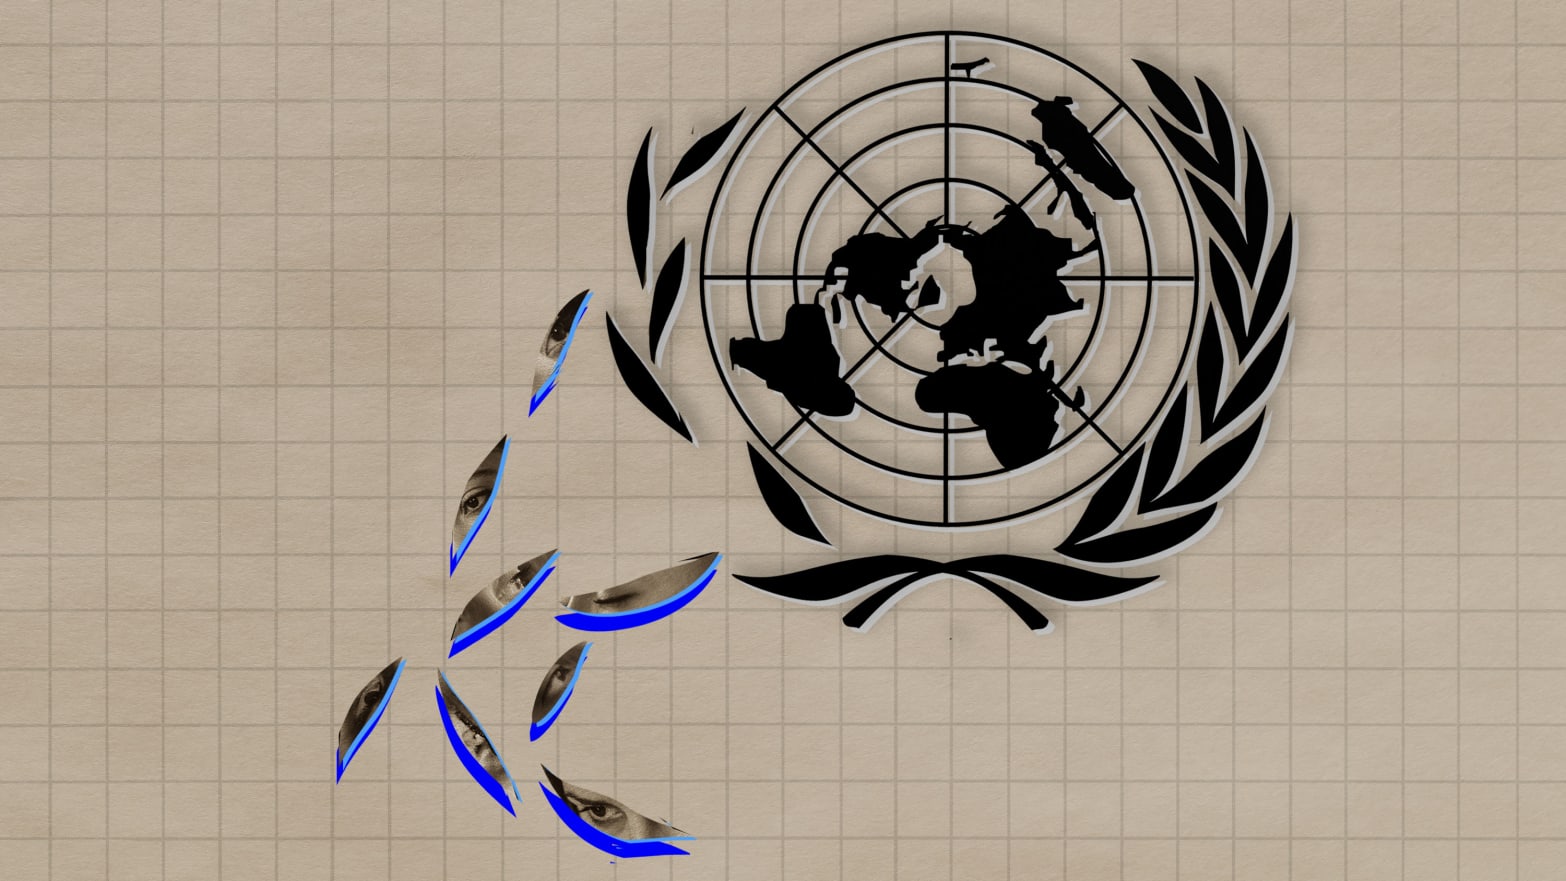 A photo illustration showing the leaves from the UN logo falling off.